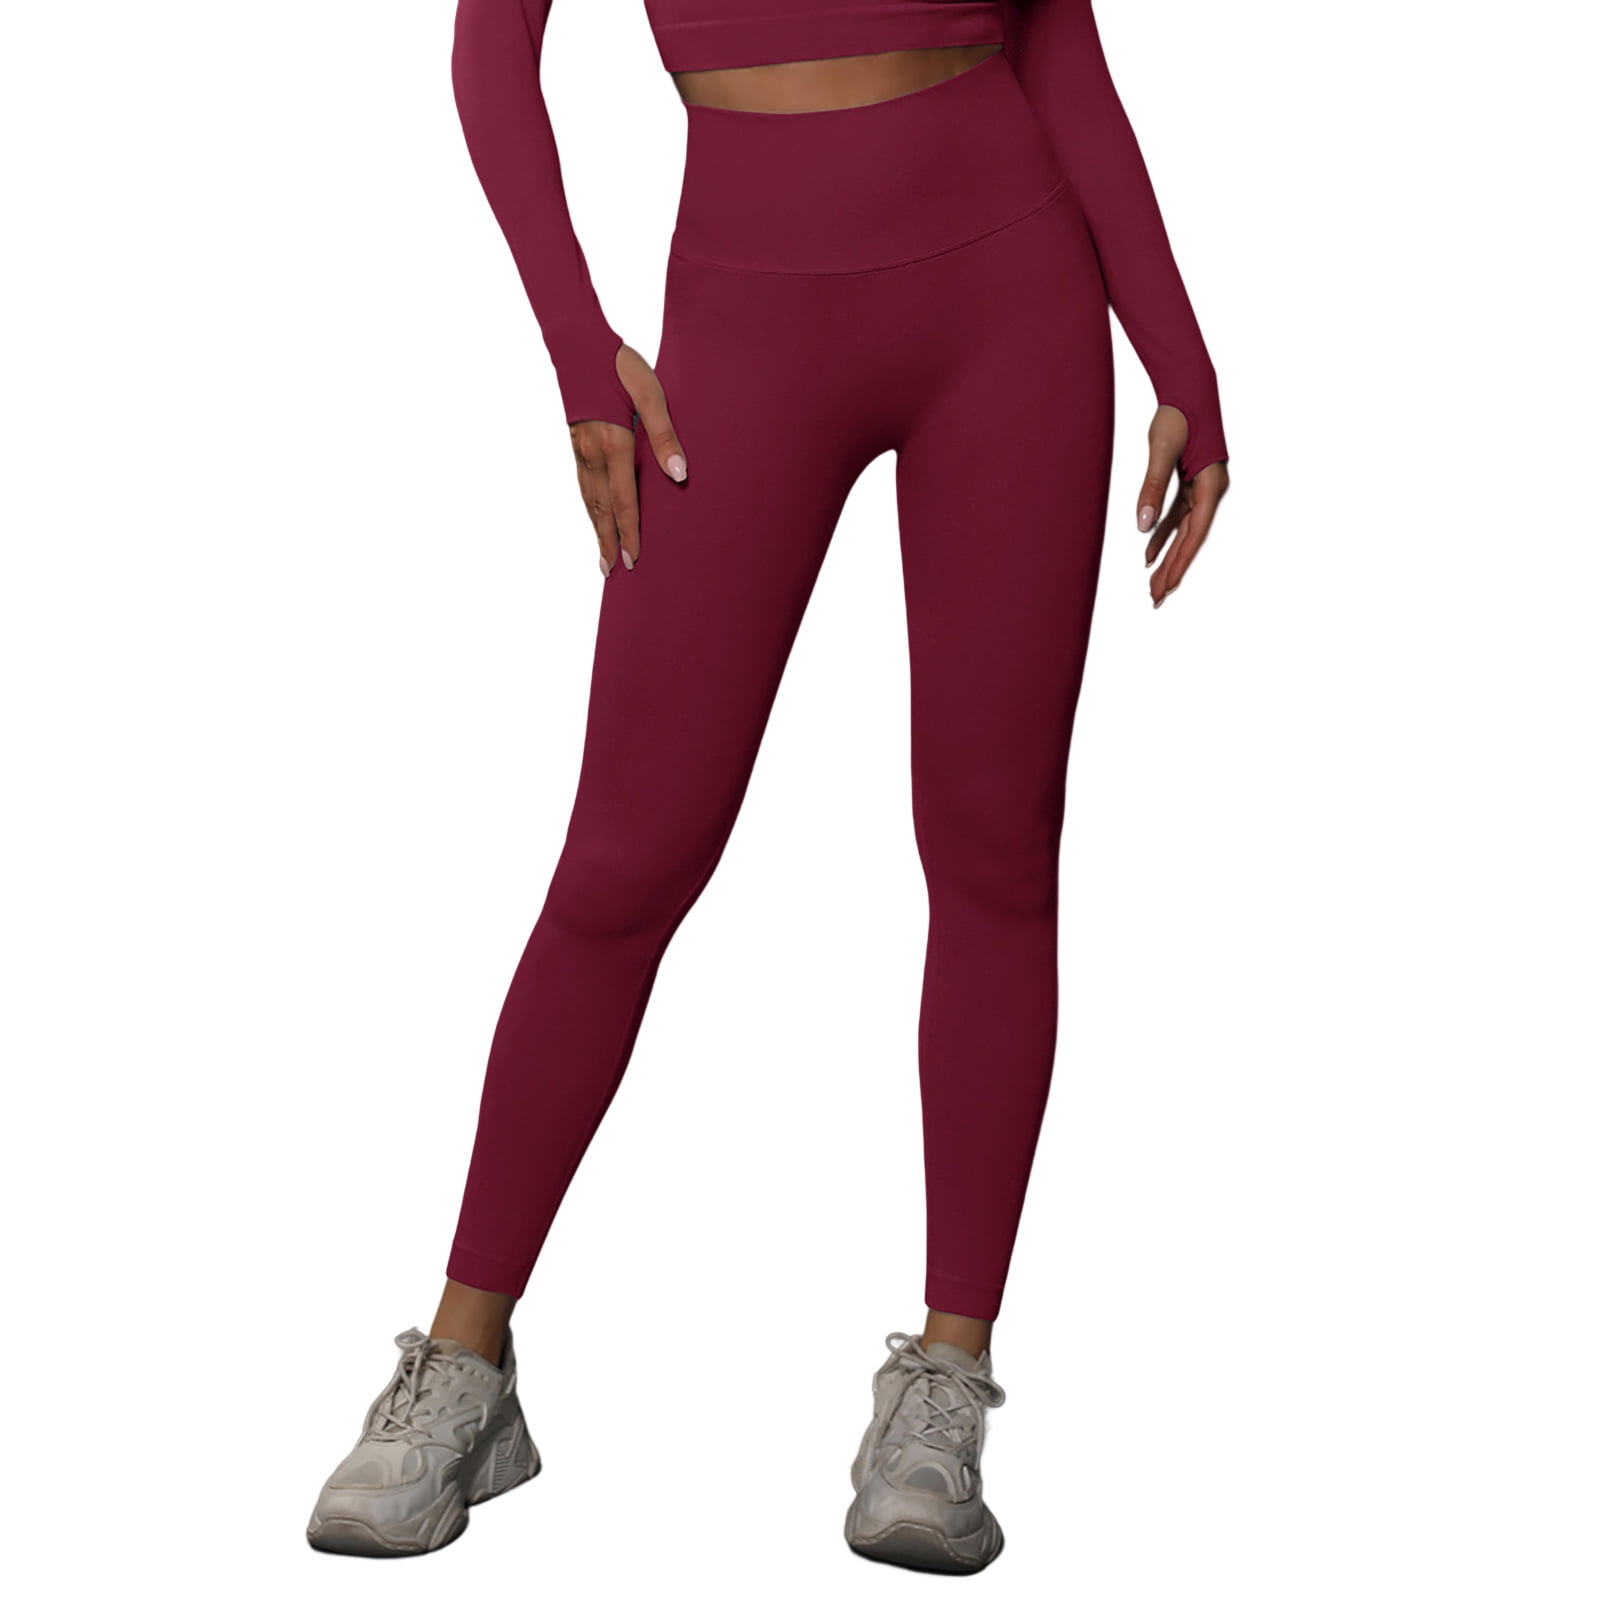 Solid Color Yoga Sports Leggings, Stretchy High Waist Fitness Athletic  Pants, Women's Activewear